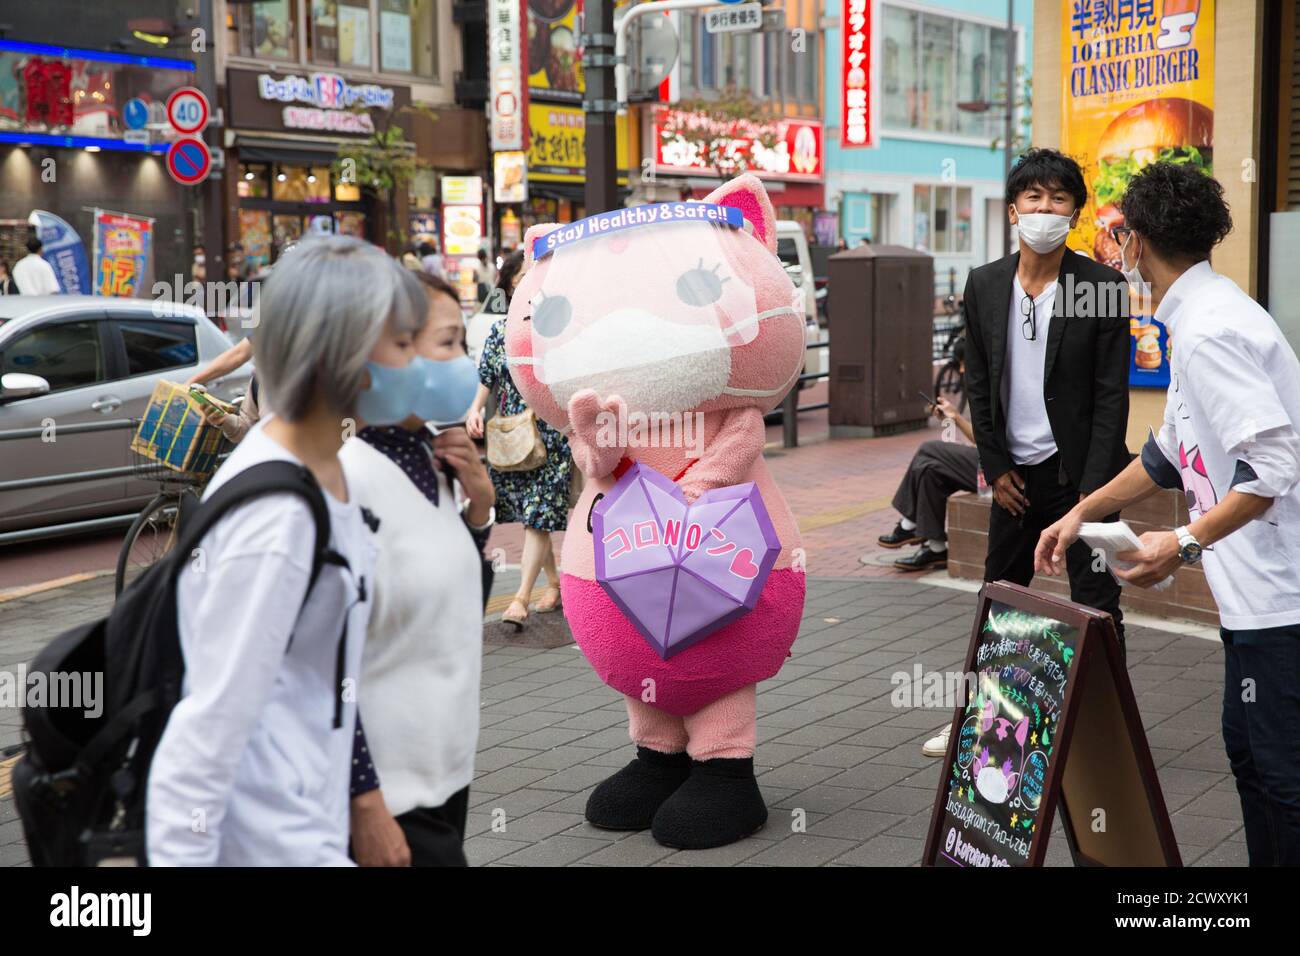 Koronon, a Japanese anti-coronavirus cat mascot waves at pedestrians wearing facemasks.Koronon, a Japanese anti-coronavirus cat mascot who hands out disposable face masks and raises awareness about the coronavirus (Covid-19) waves at pedestrians in Ikebukuro, Tokyo. Koronon can also be booked to visit schools and companies to share its message about hygiene and other measures to fight Covid-19. Stock Photo